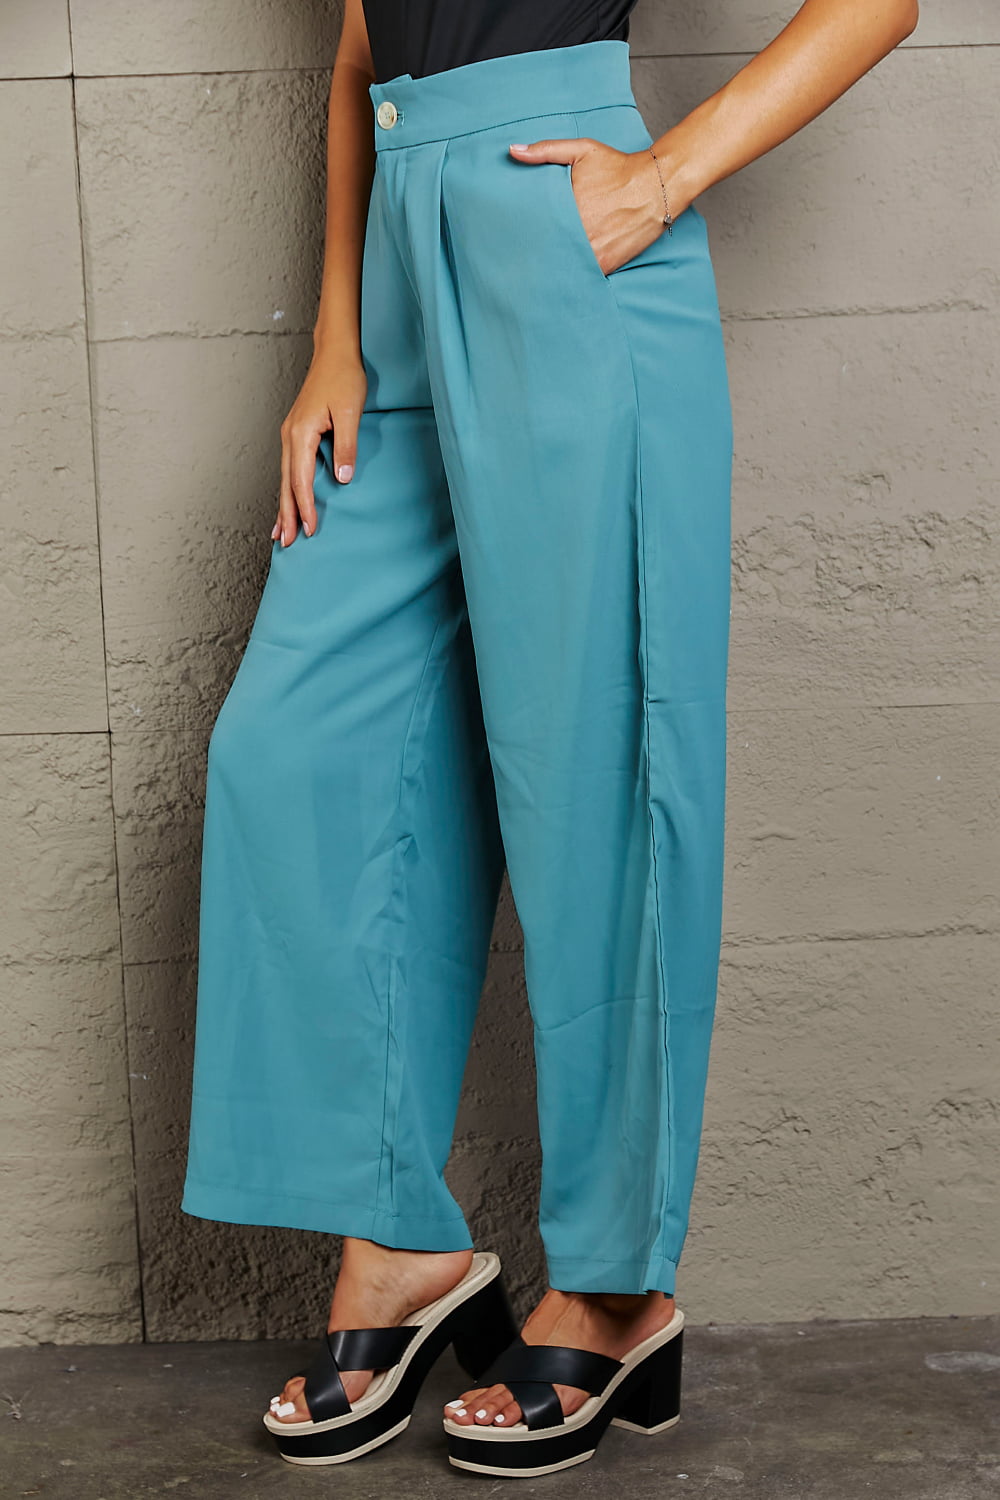 Slate Gray Wide Leg Buttoned Pants Sentient Beauty Fashions Apparel & Accessories